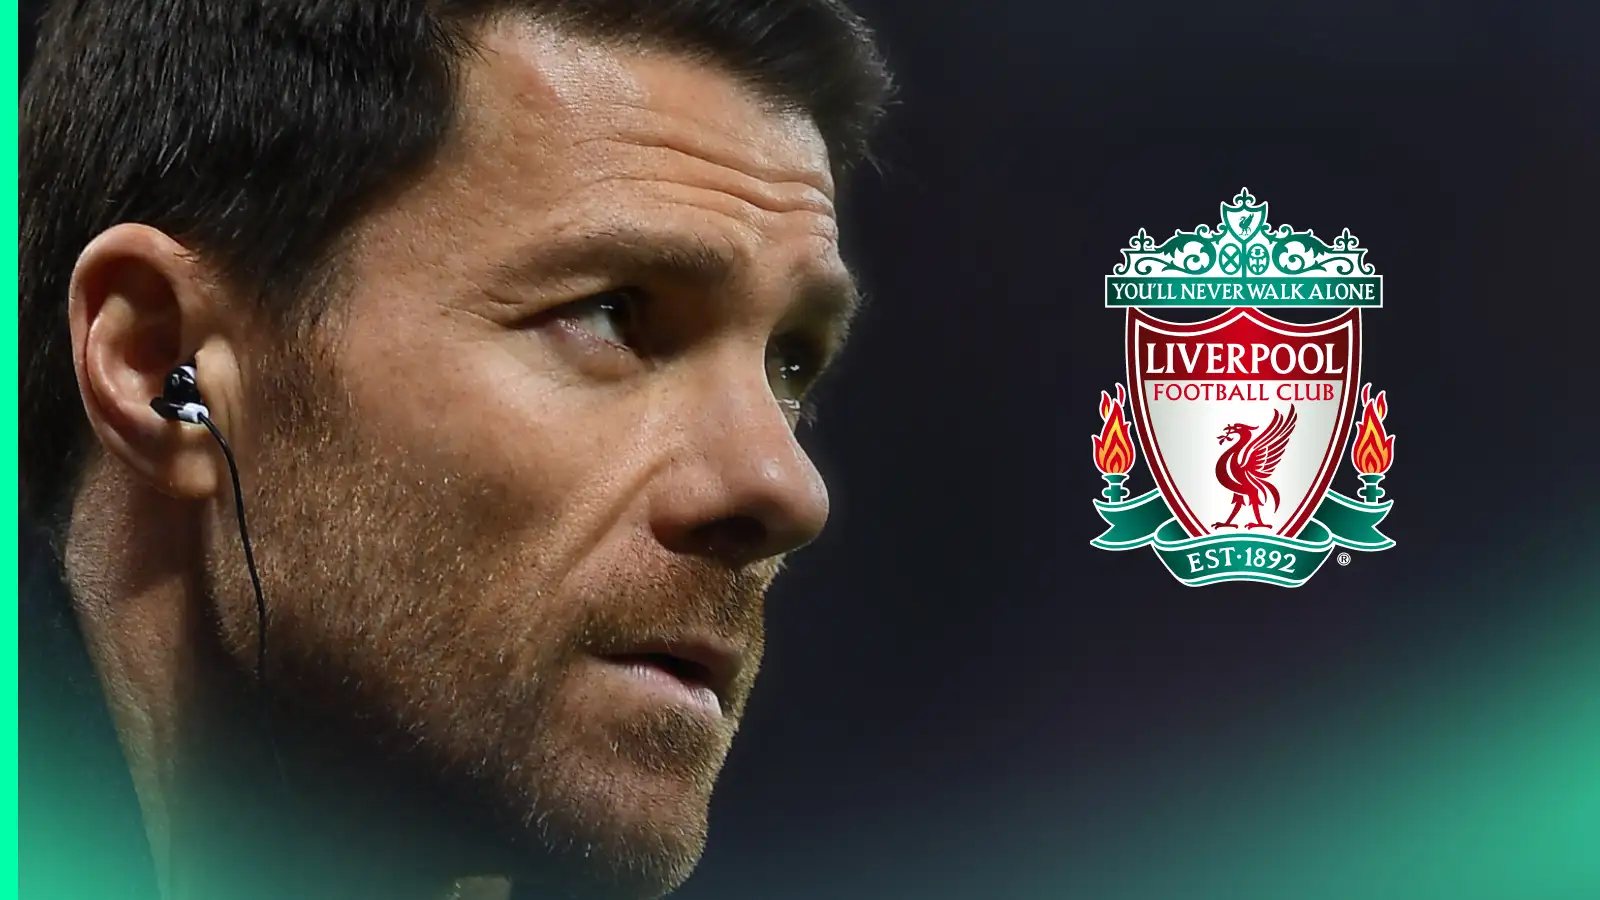 A close-up shot of Xabi Alonso with a prominent Liverpool badge alongside him